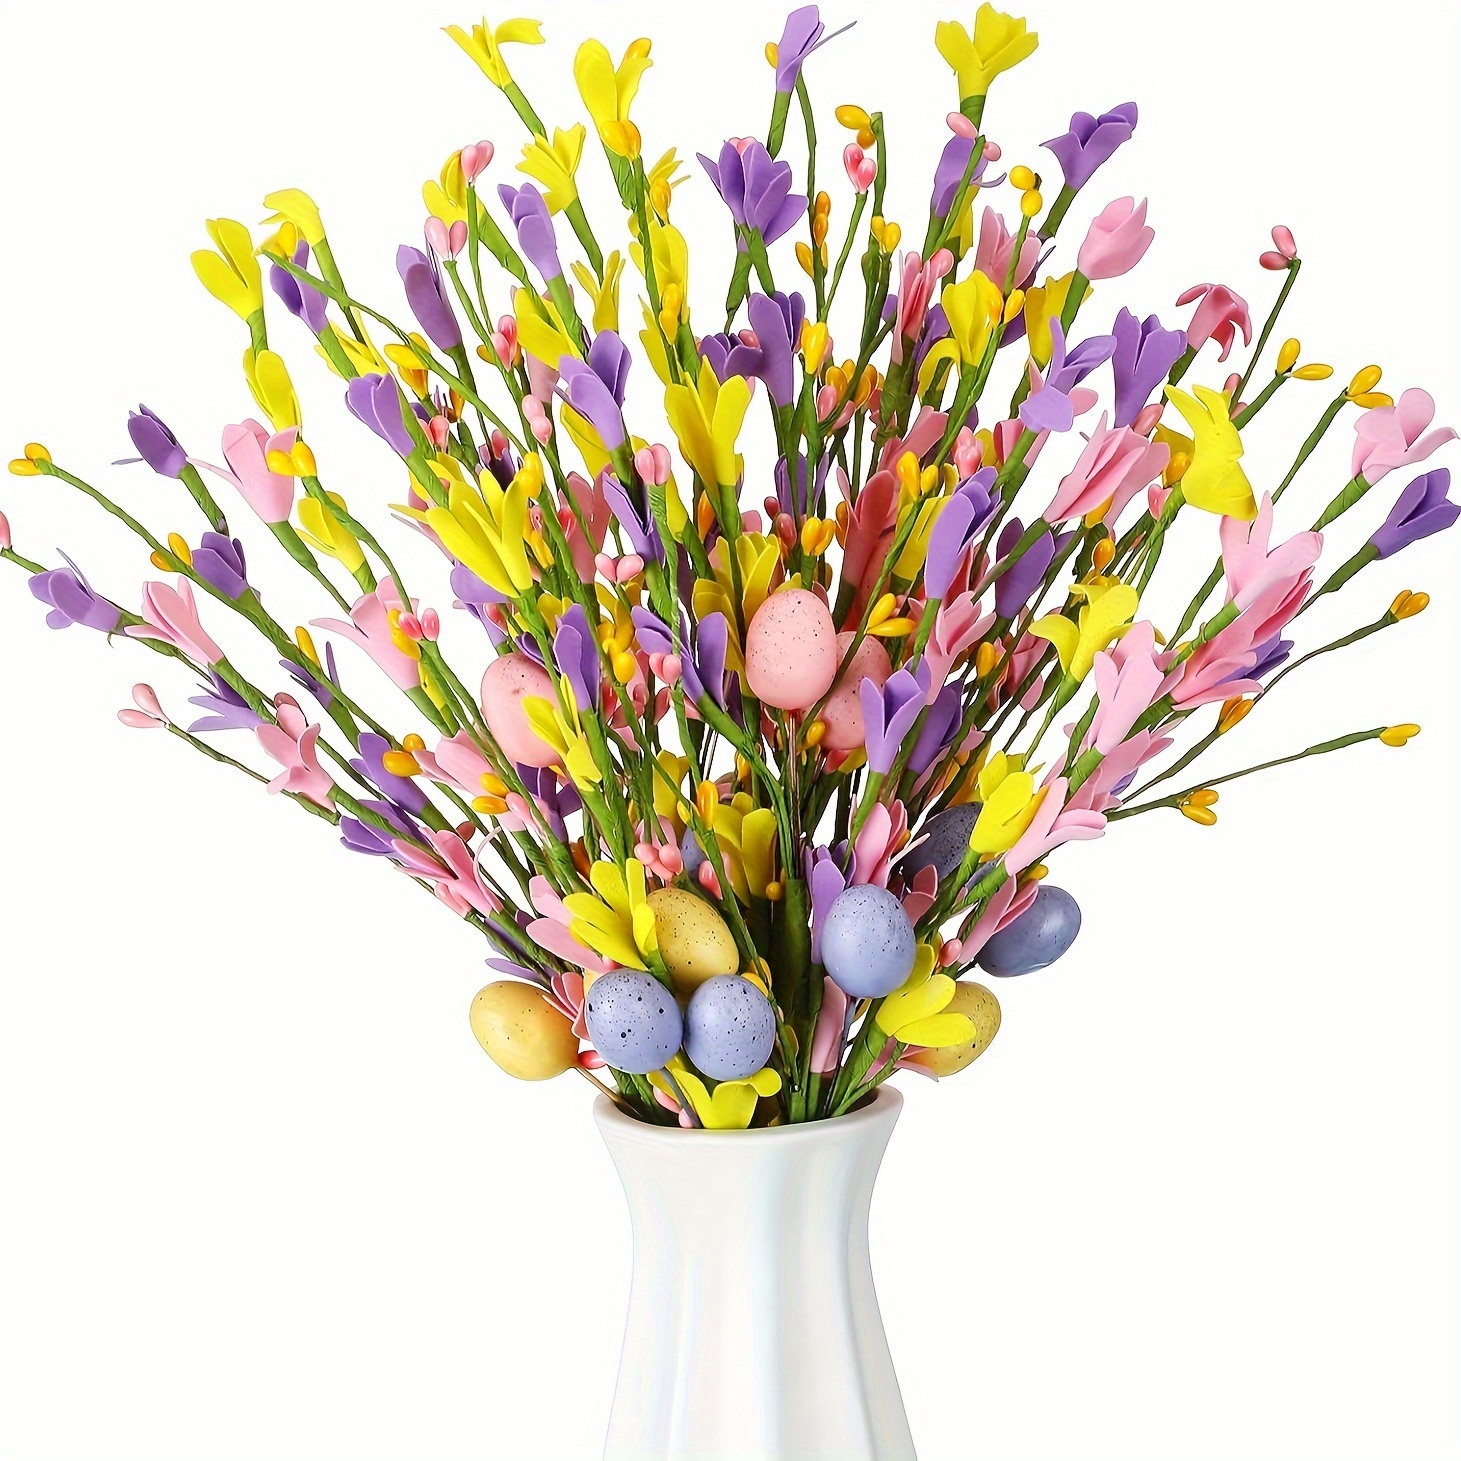 

2/4pcs Artificial Easter Stems Spring Colorful Berry Picks Berry Stems With Easter Eggs Or Carrots Fake Picks Easter Decor For Floral Arrangement Home Centerpiece Vase Windowsill Decor (flower Style)